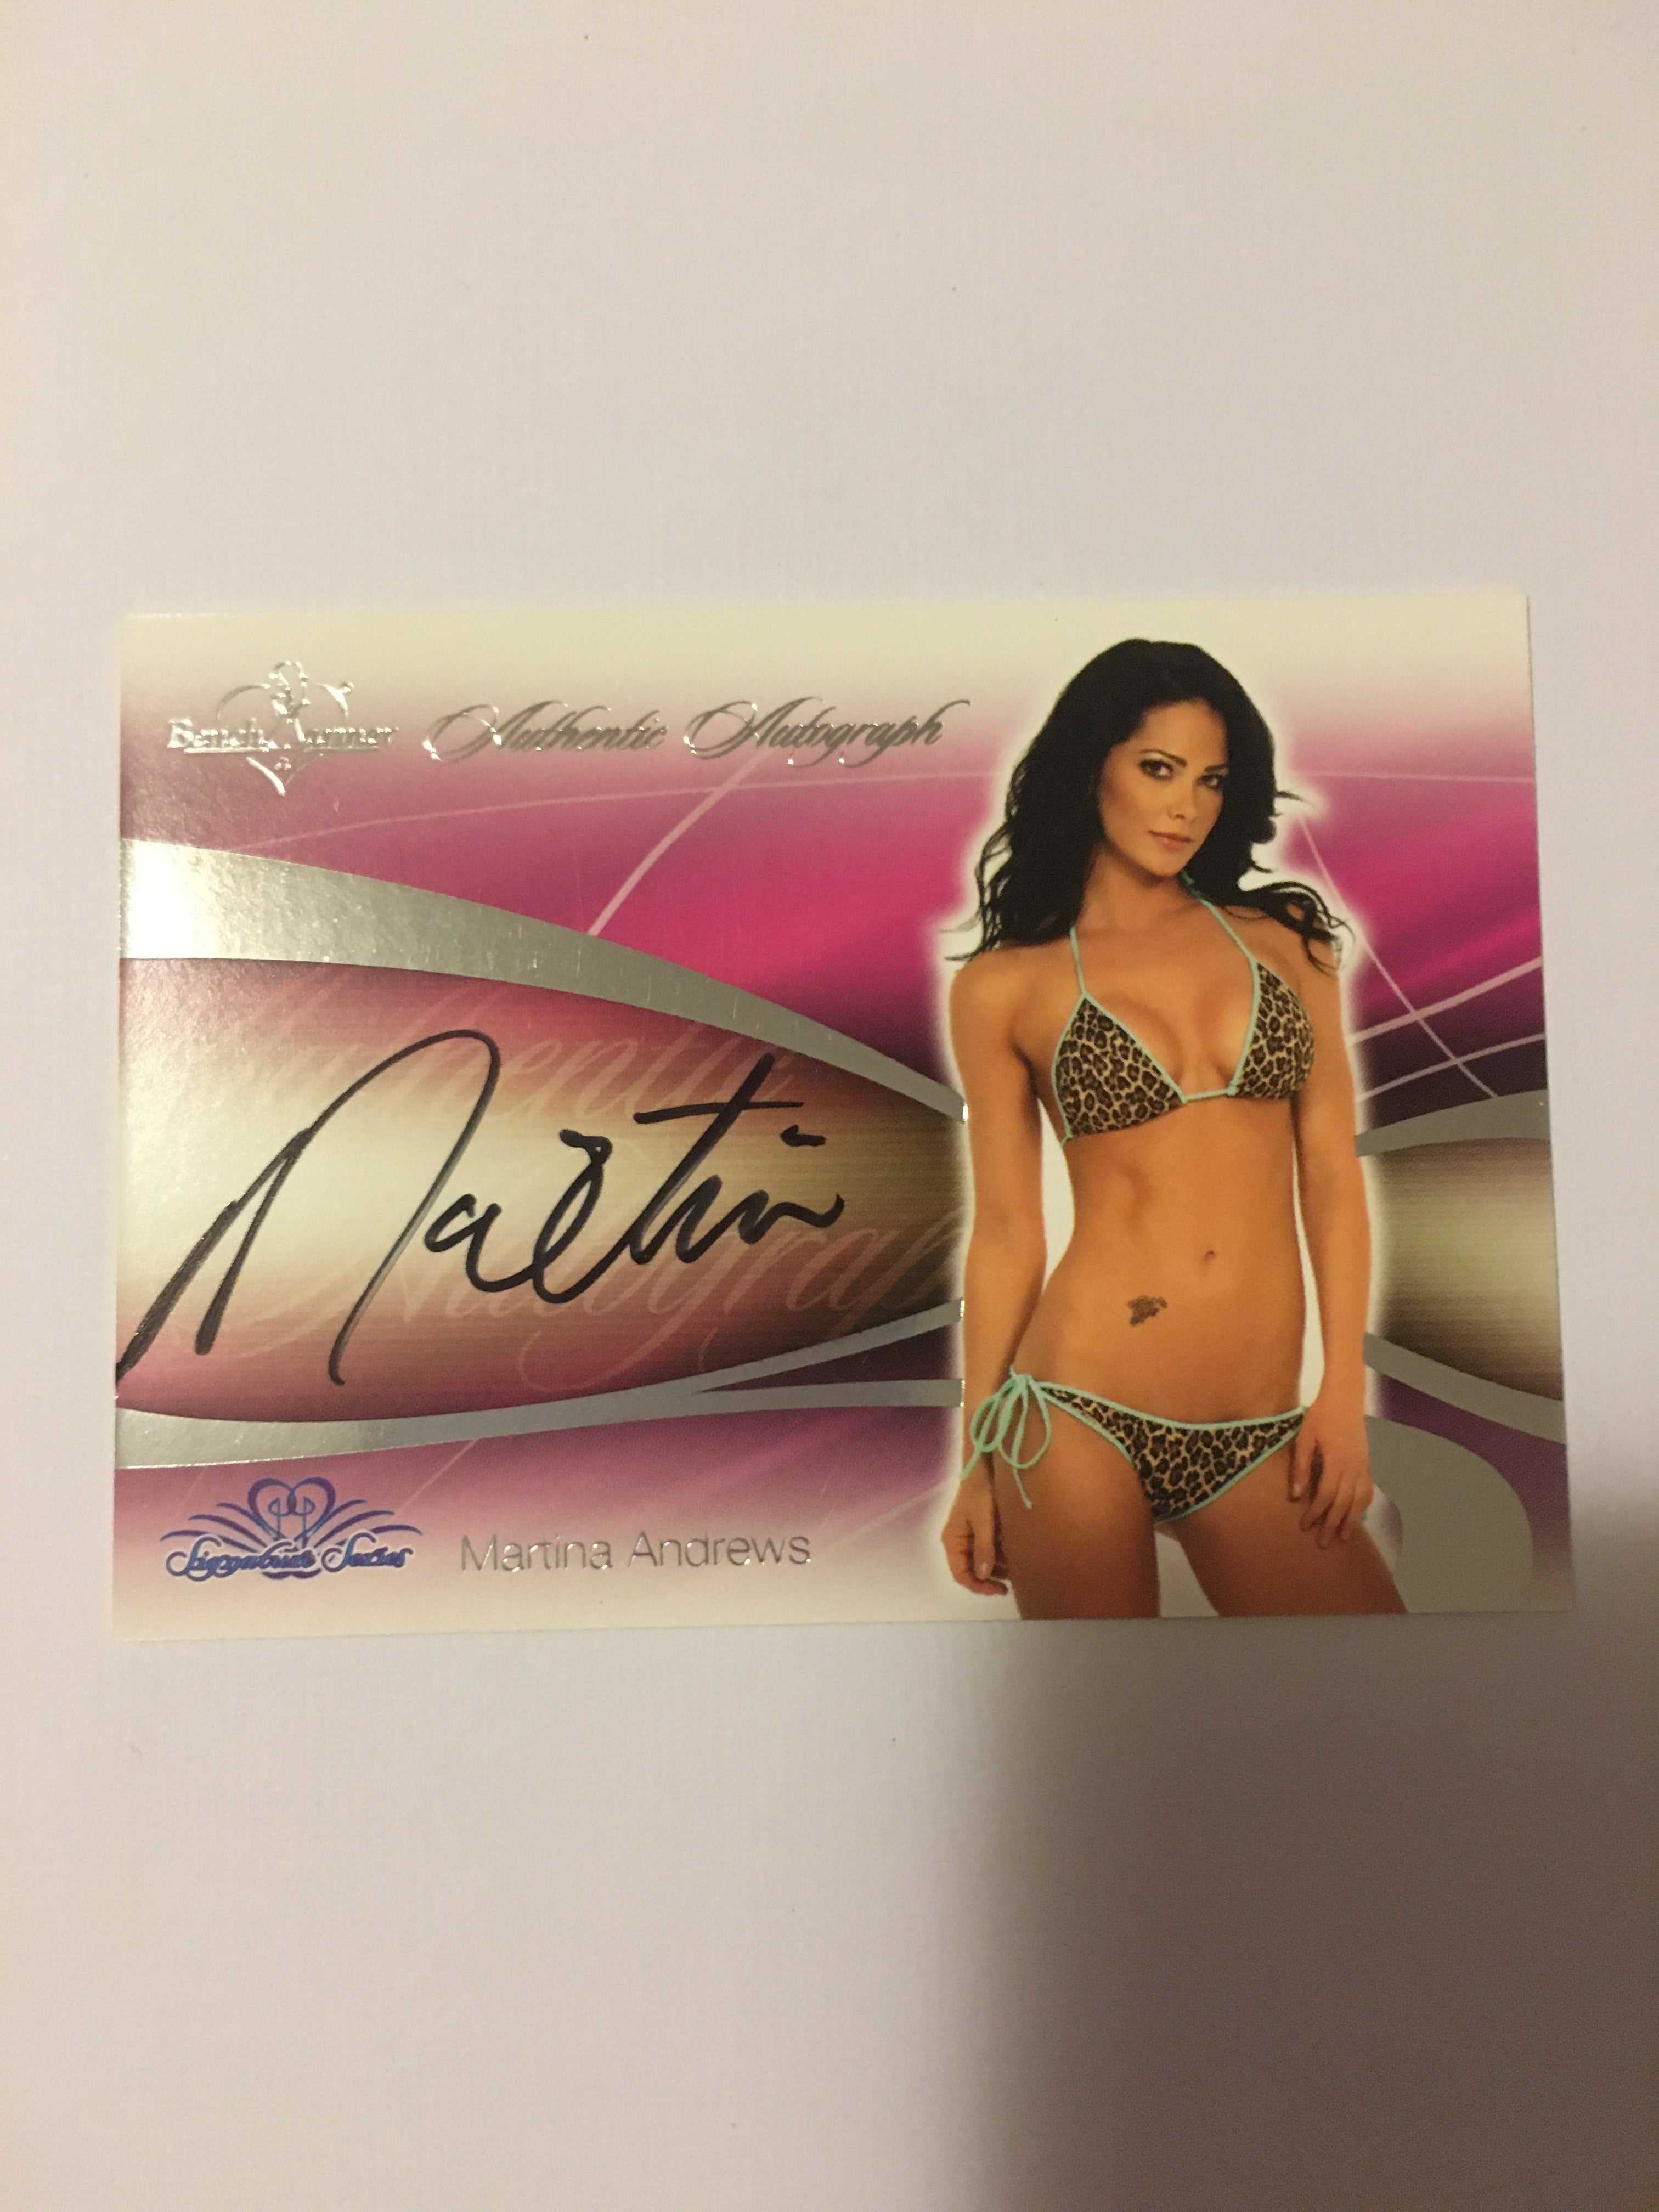 Martina Andrews - Autographed Benchwarmer Trading Card (5)